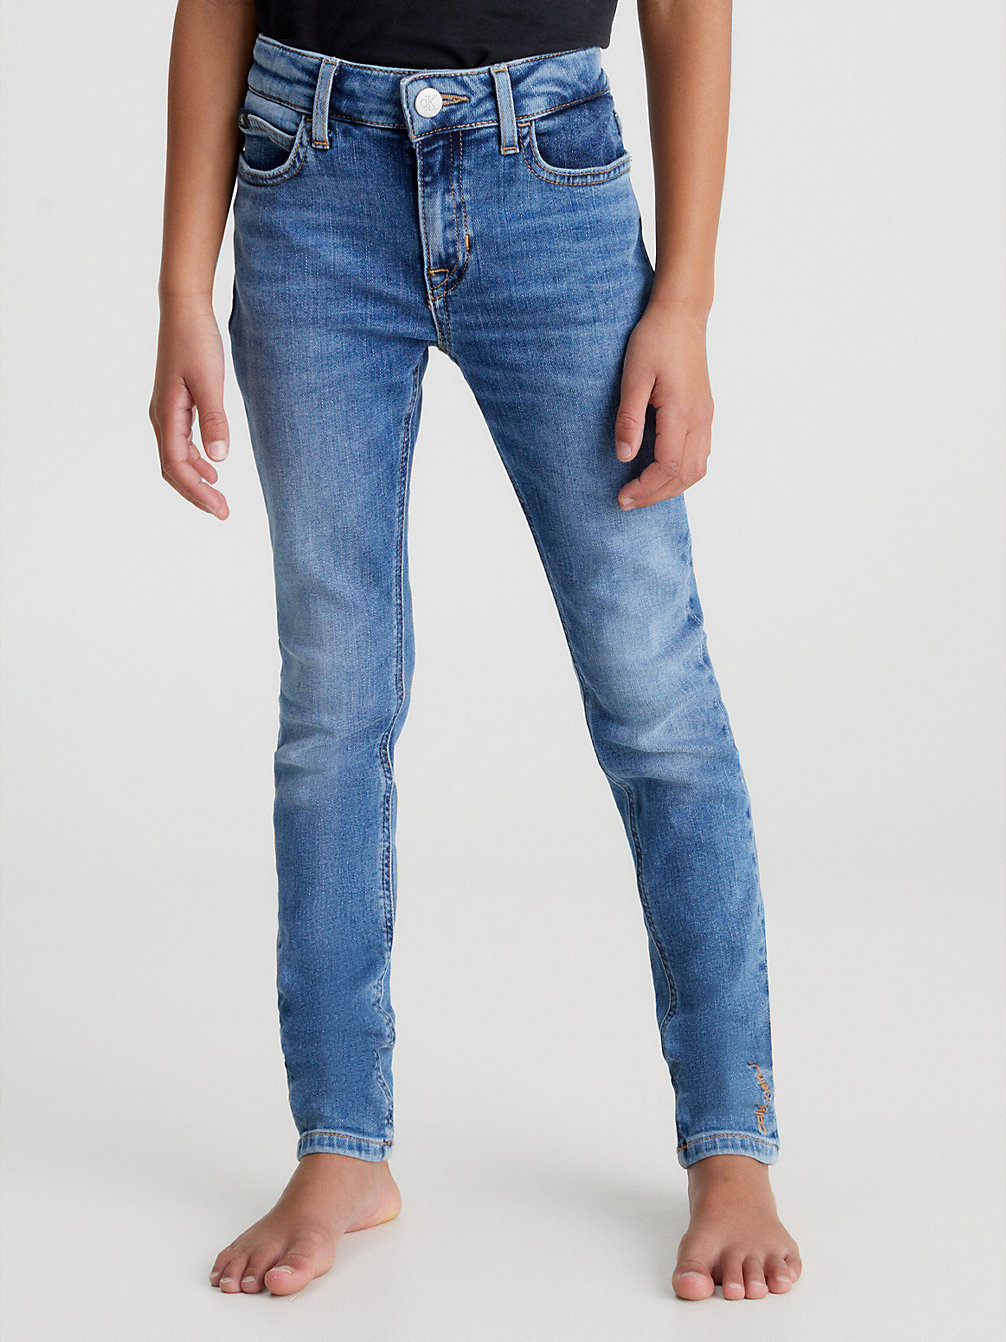 STORMY BLUE > Mid Rise Skinny Jeans > undefined girls - Calvin Klein